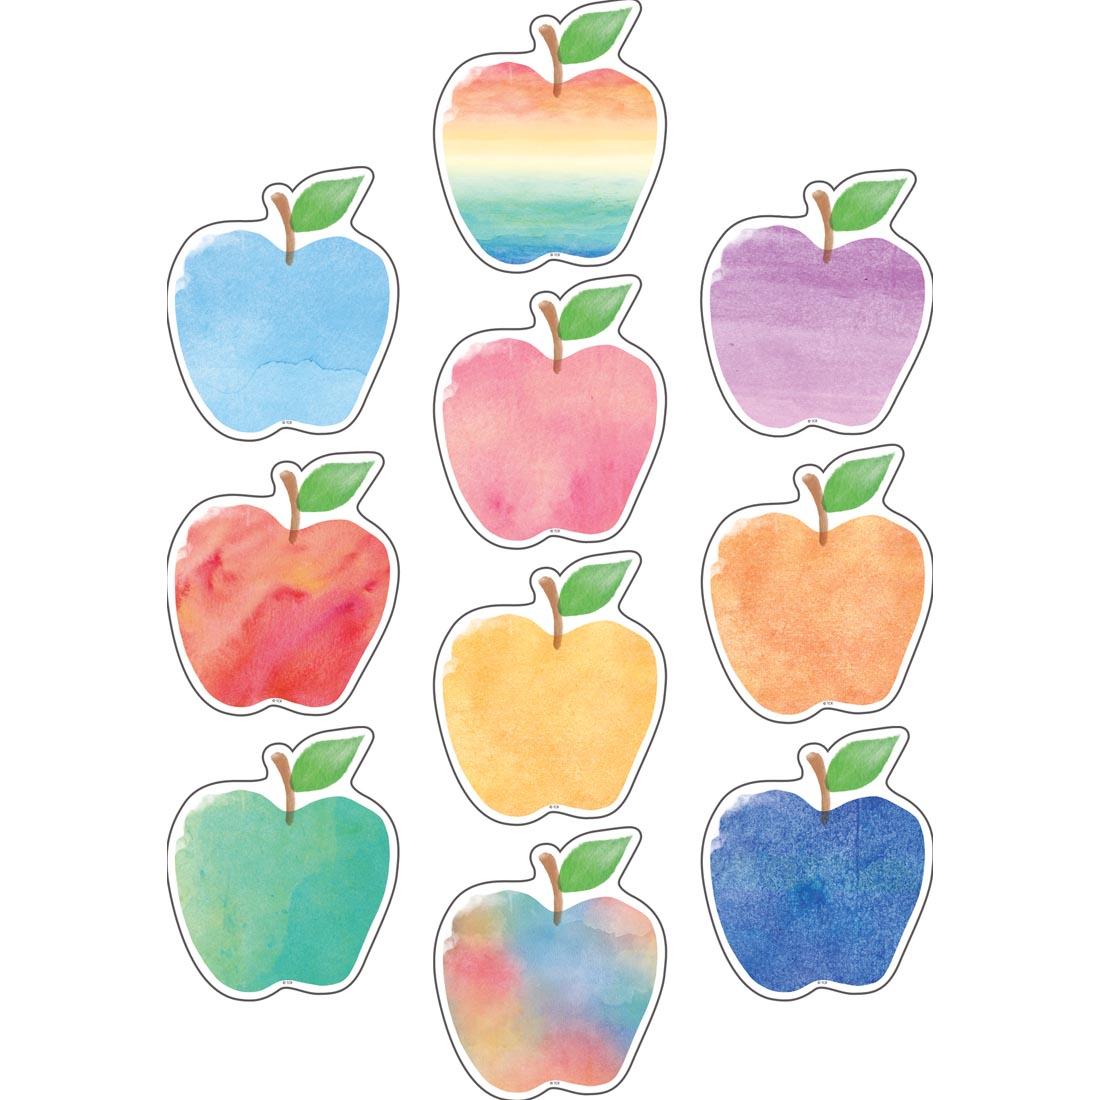 Apples Accents from the Watercolor collection by Teacher Created Resources